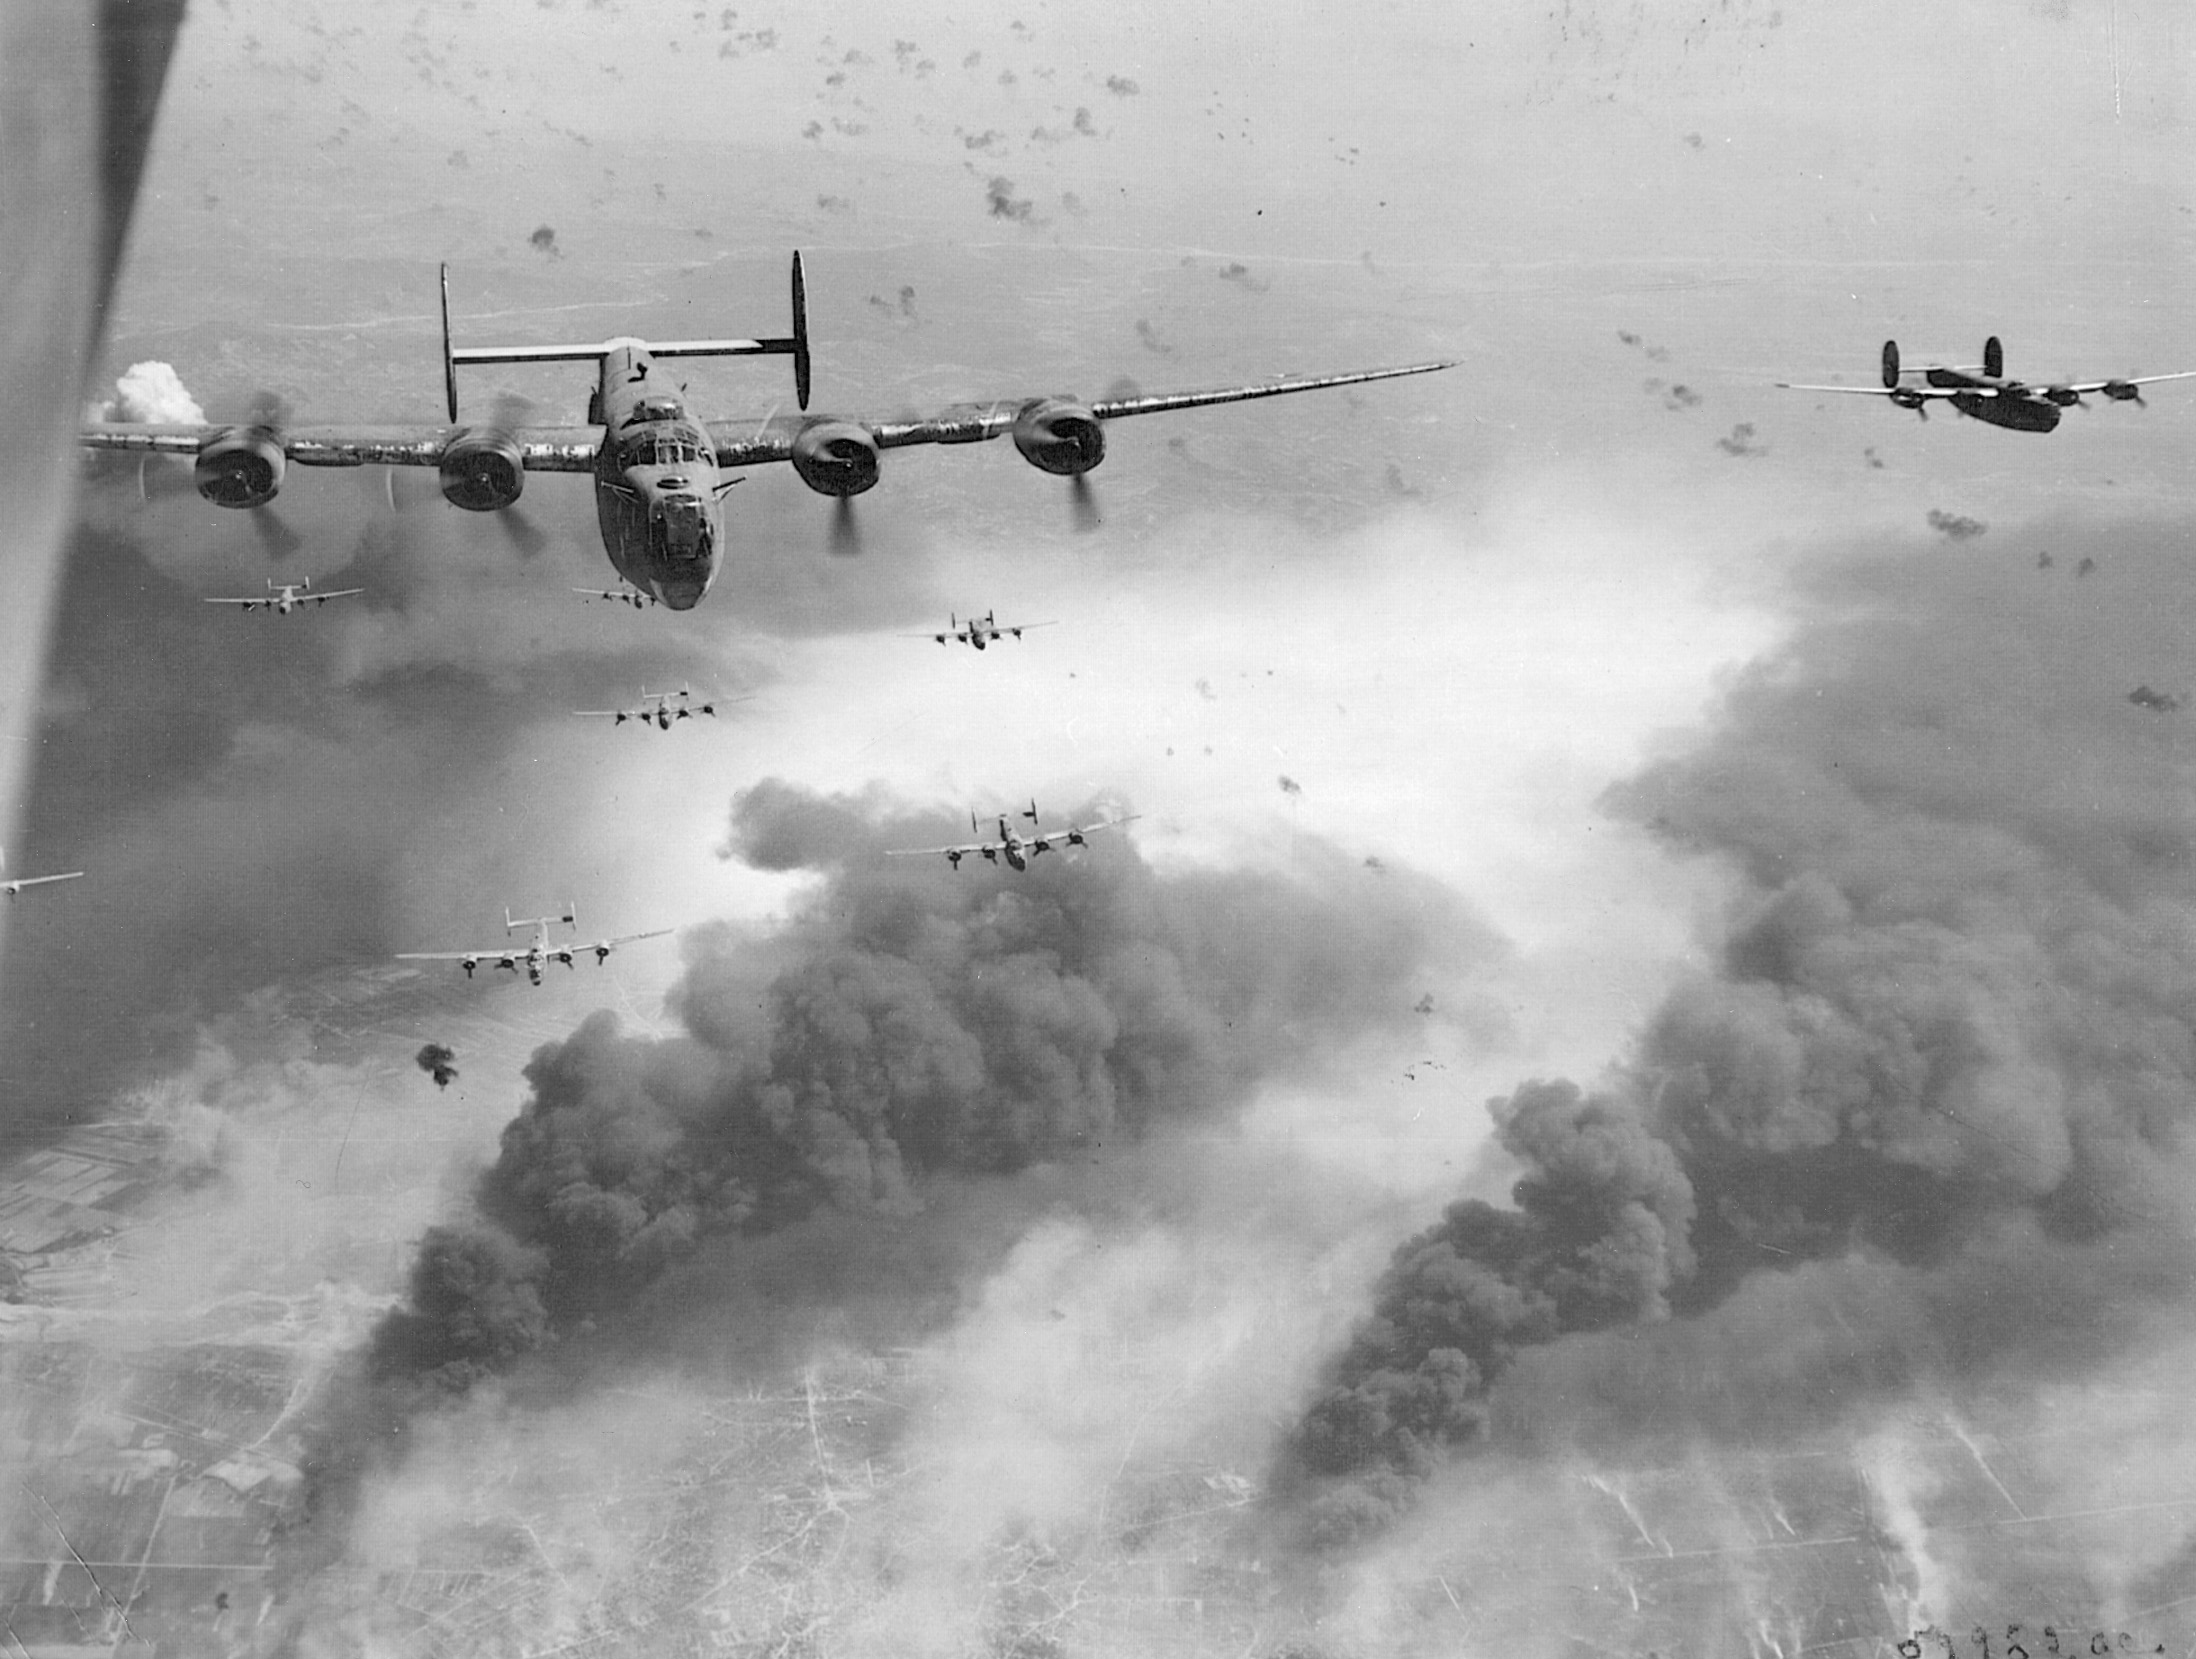 On May 31, 1944, U.S. B-24s hit Ploesti again, this time from a higher altitude. 